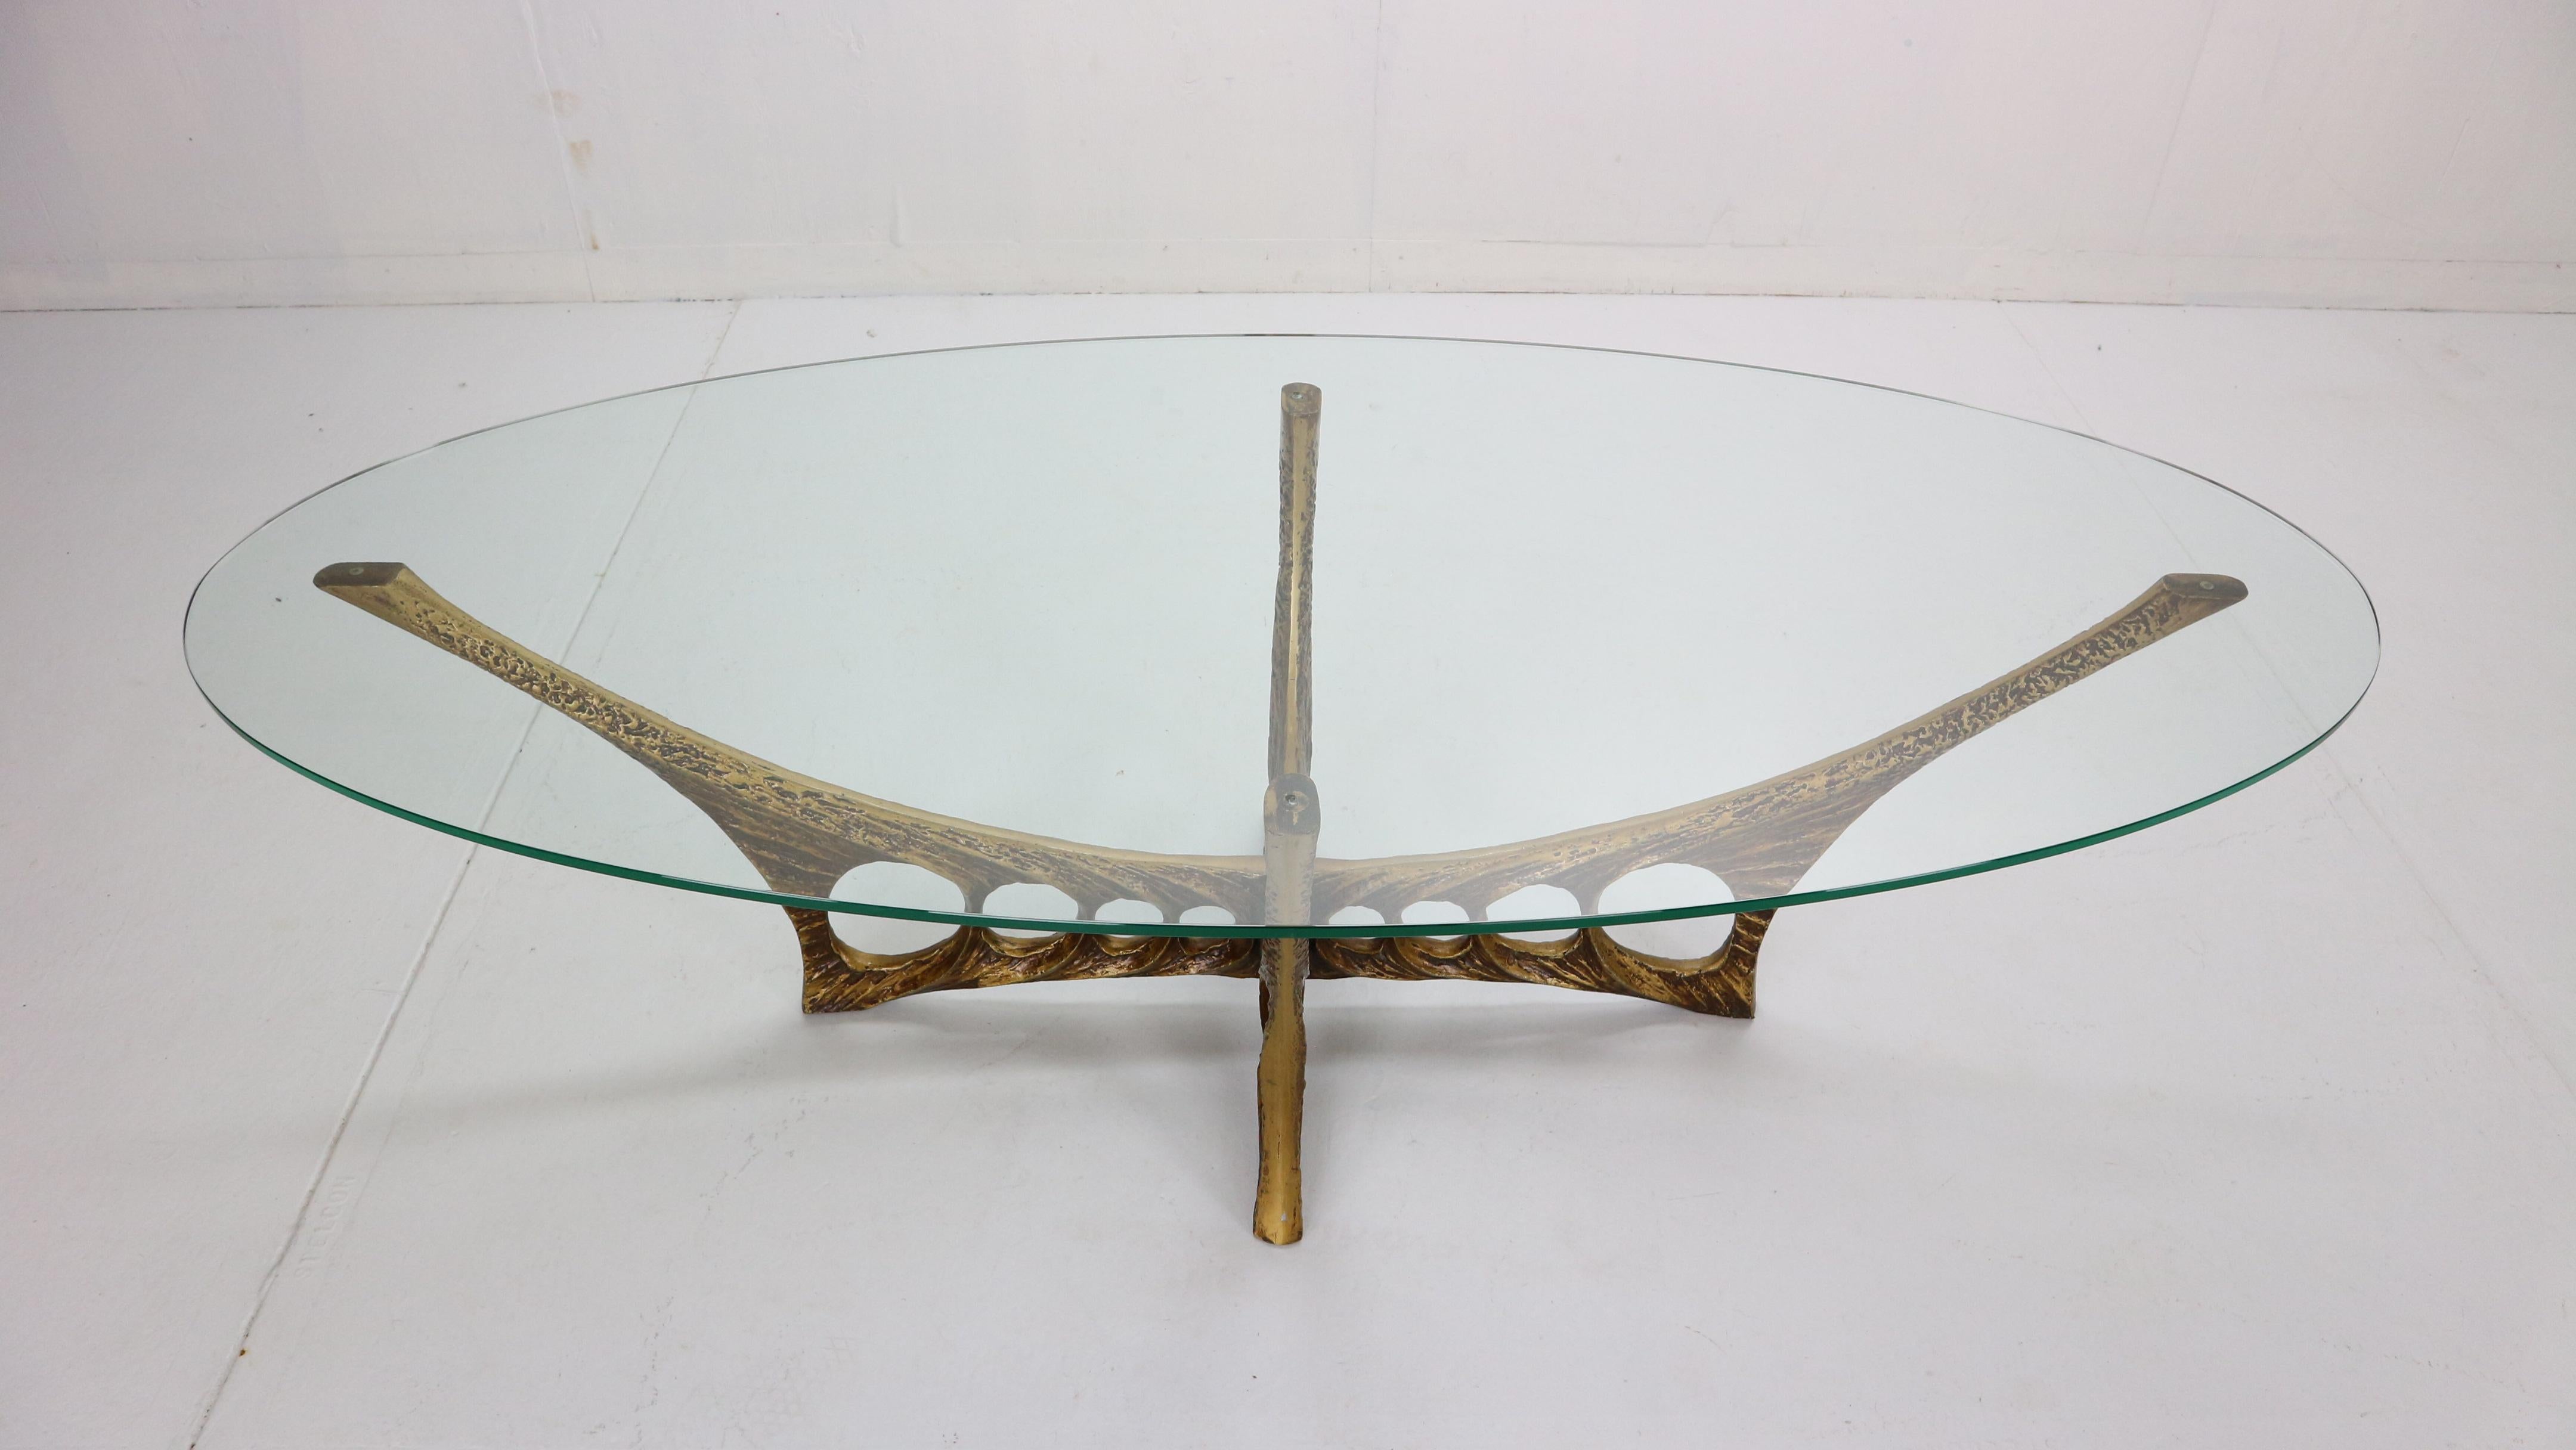 Aluminum Willy Ceysens Brutalist Oval Glass and Bronze Coffee Table, 1965 Belgium